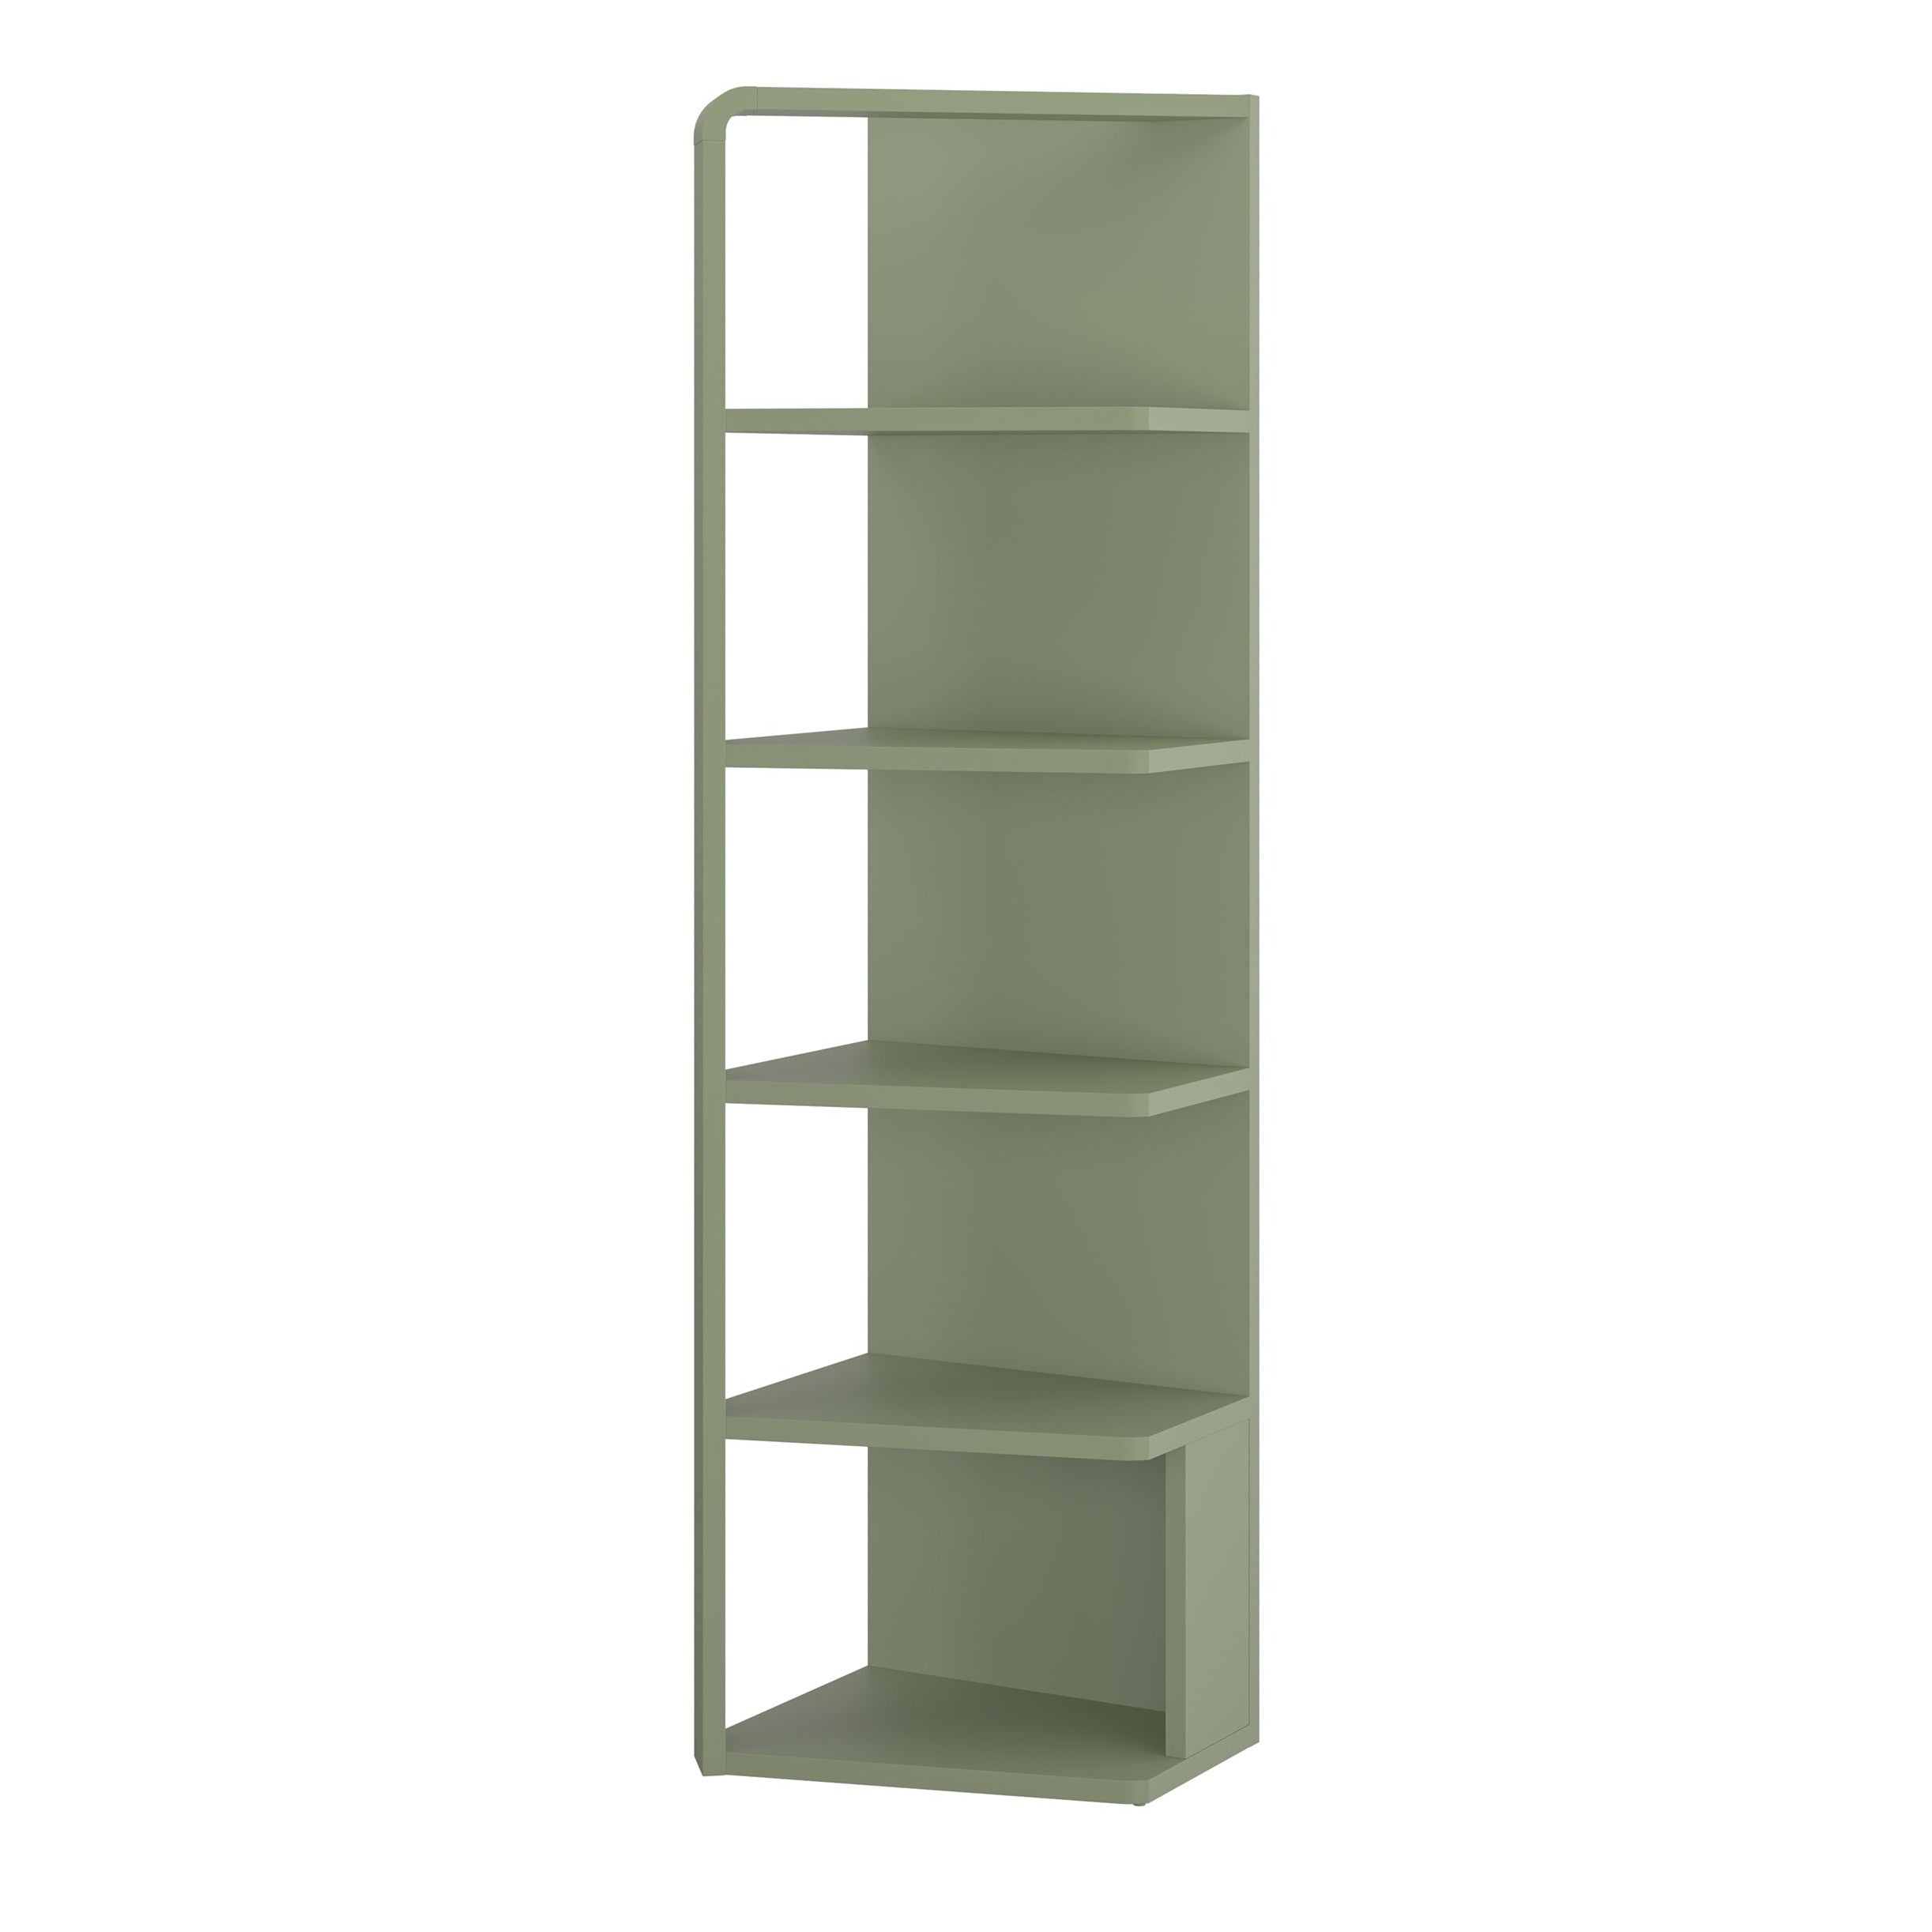 Gautier Peps Curveo Bookcase – available in 3 colours